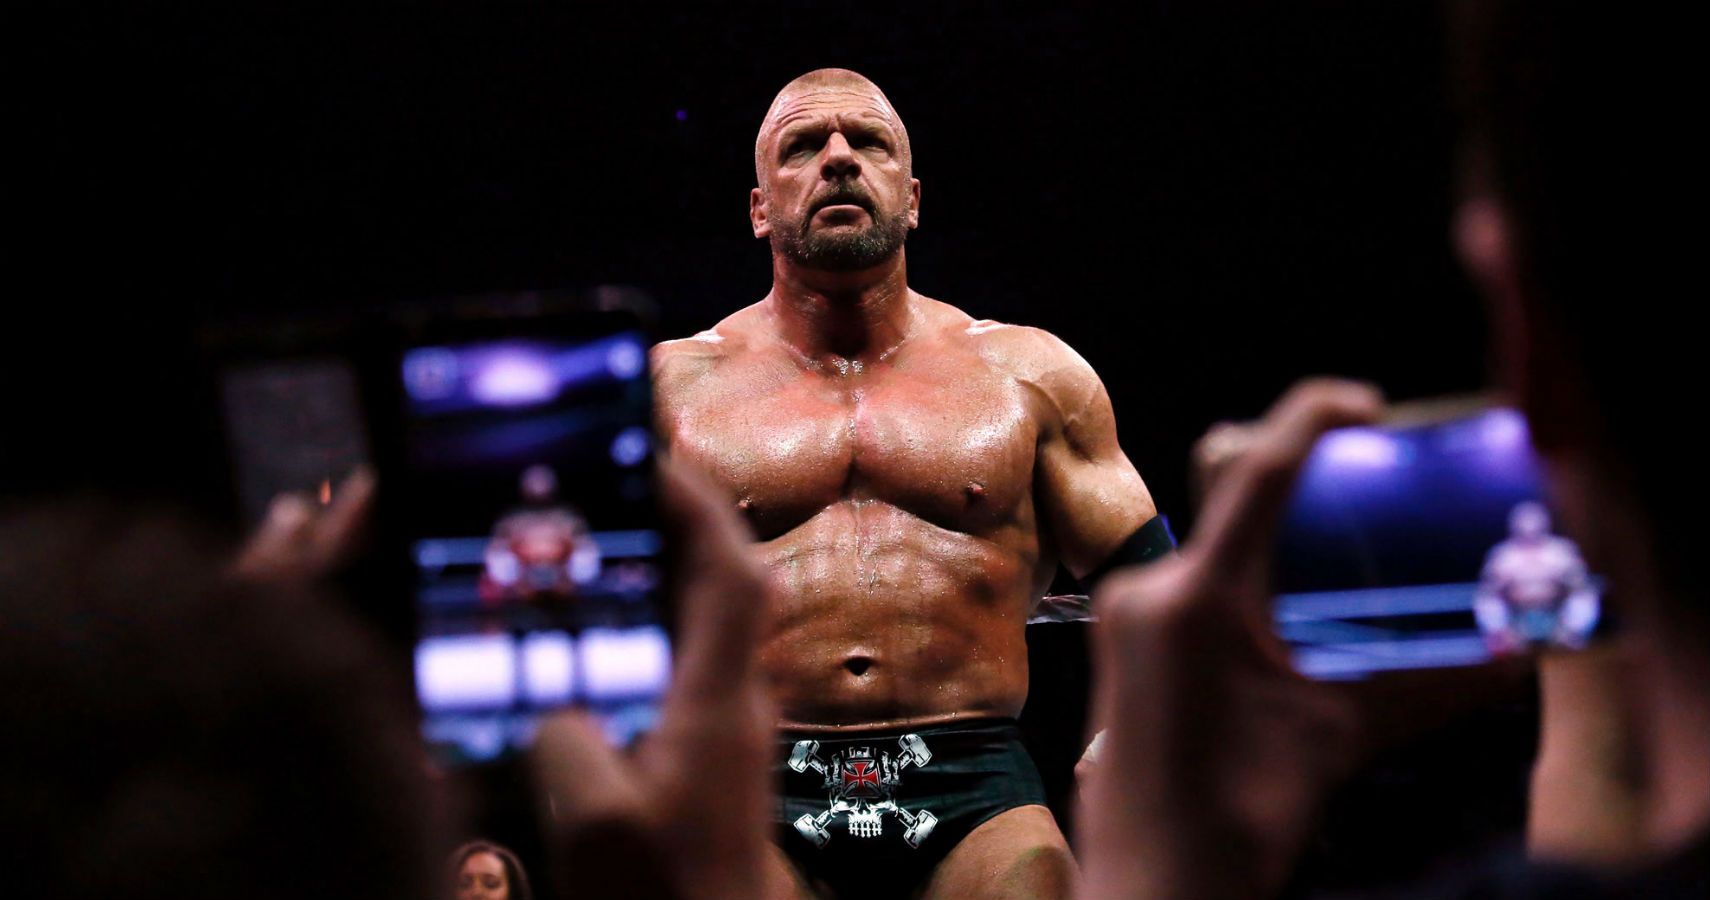 Triple H is gearing up for his annual WrestleMania match so we should expec...